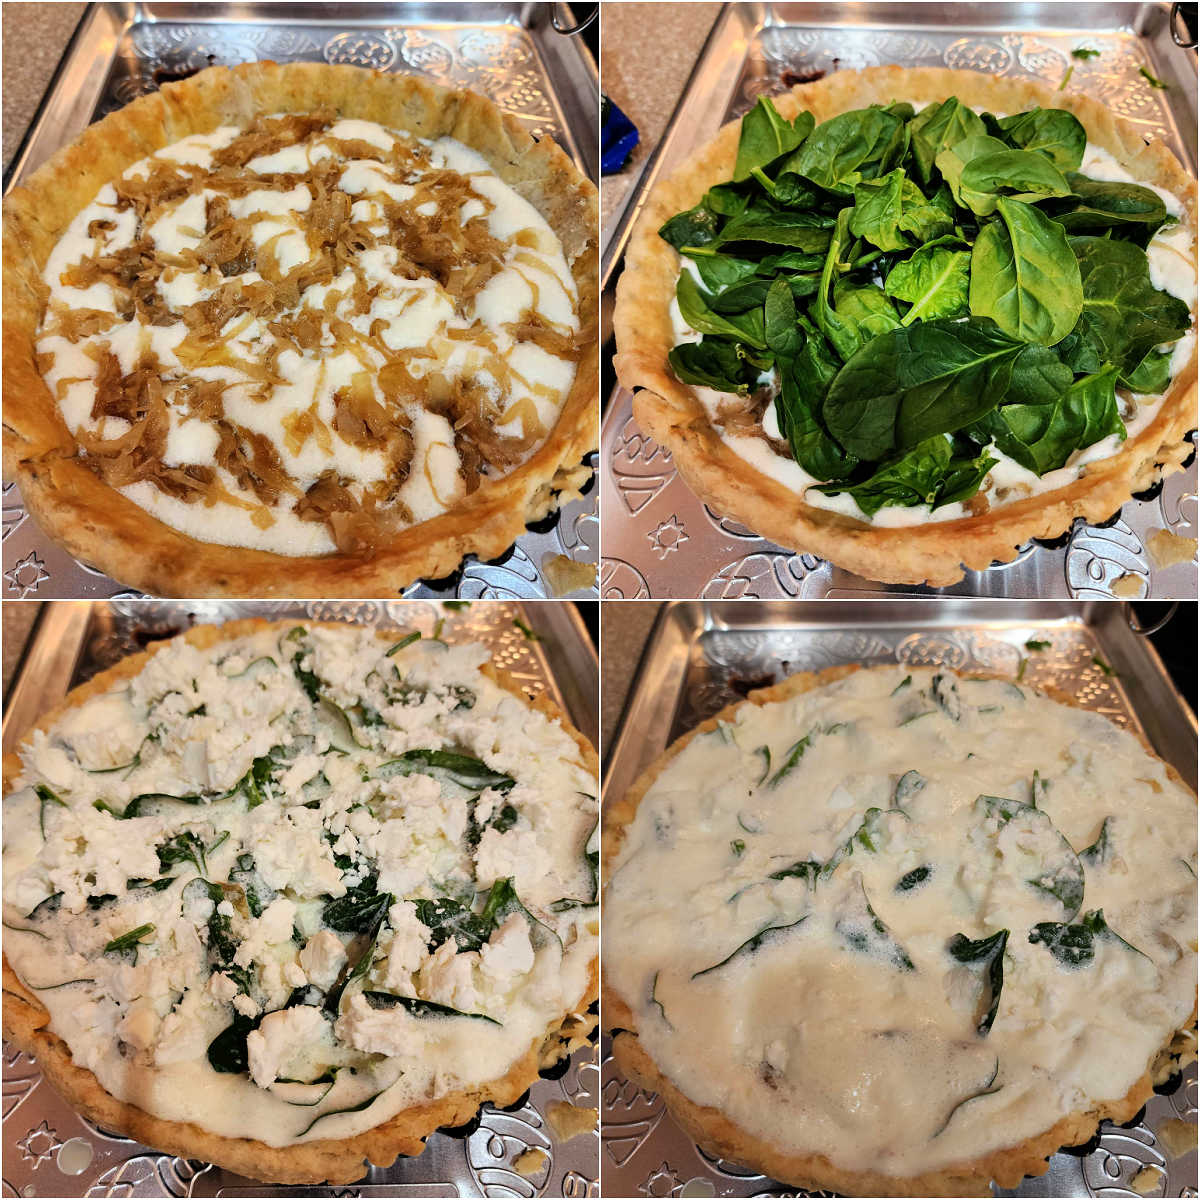 A collage of 4 images showing filling a quiche, first caramelized onions, then a bunch of spinach. The third shows goat cheese on top, and the fourth shows the quiche with all the fillings pressed down under the custard and ready to go in the oven.